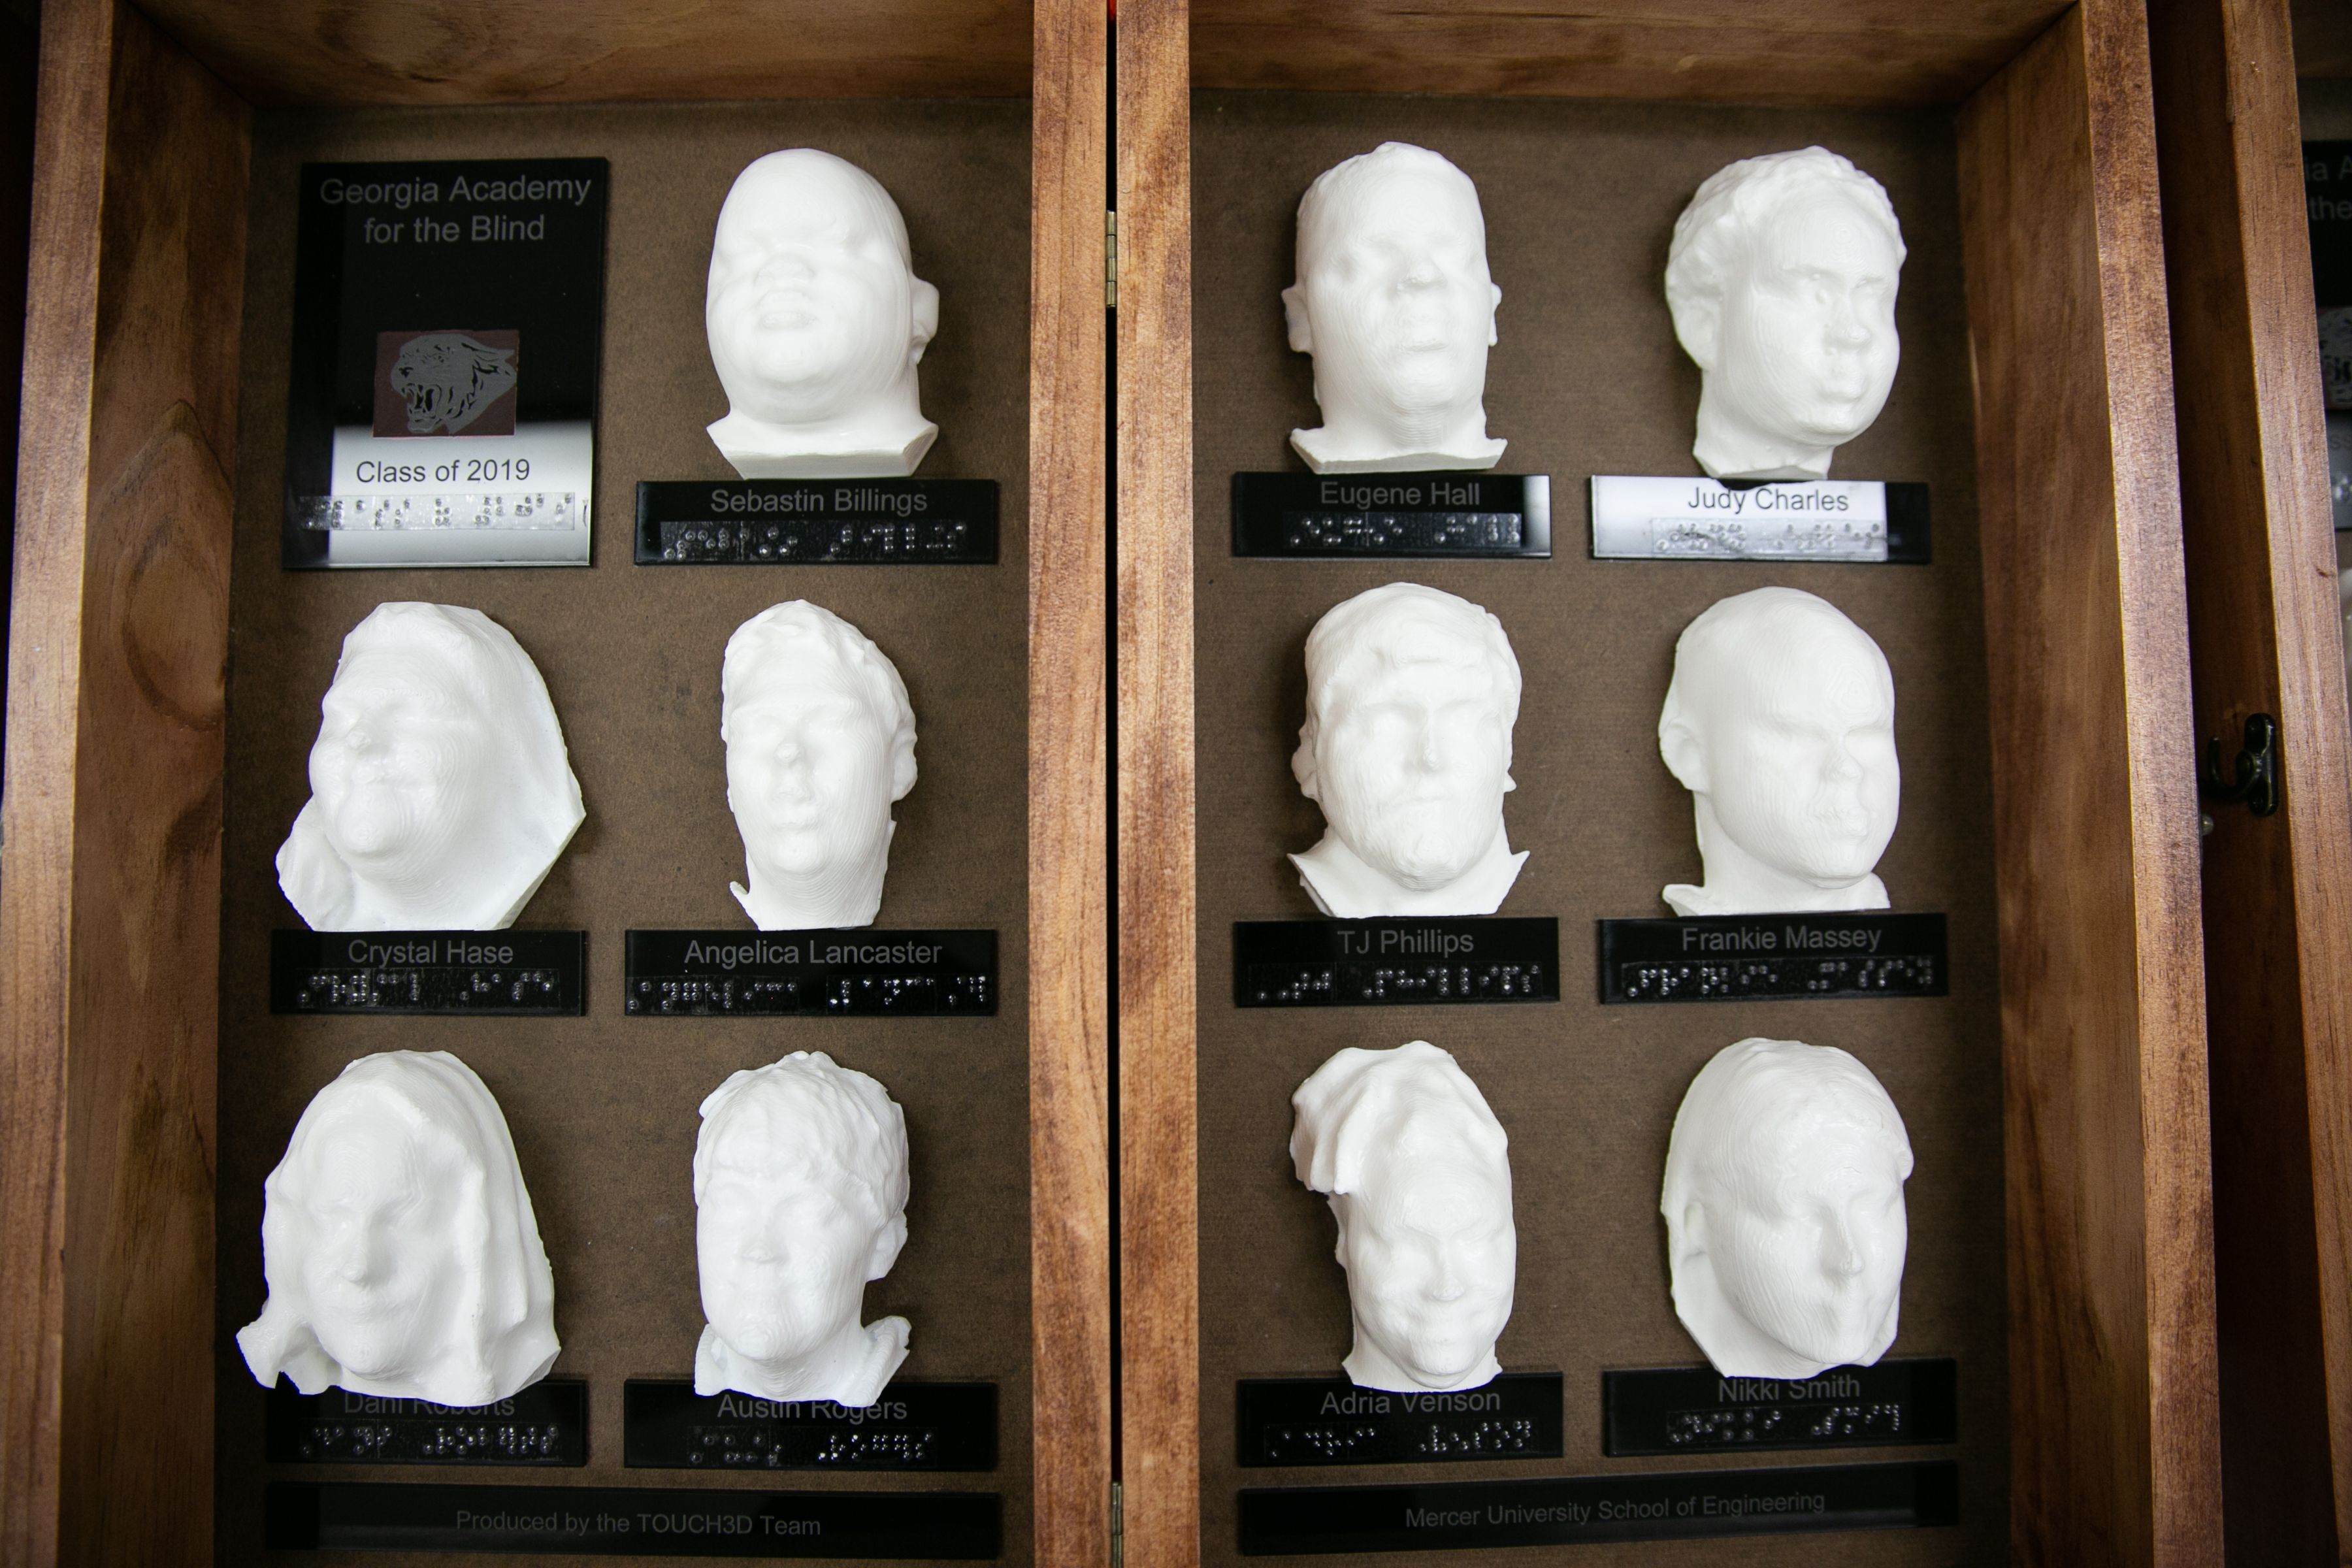 The 3D yearbook features face models of 11 Georgia Academy for the Blind Class of 2019 graduates inside a wooden case.